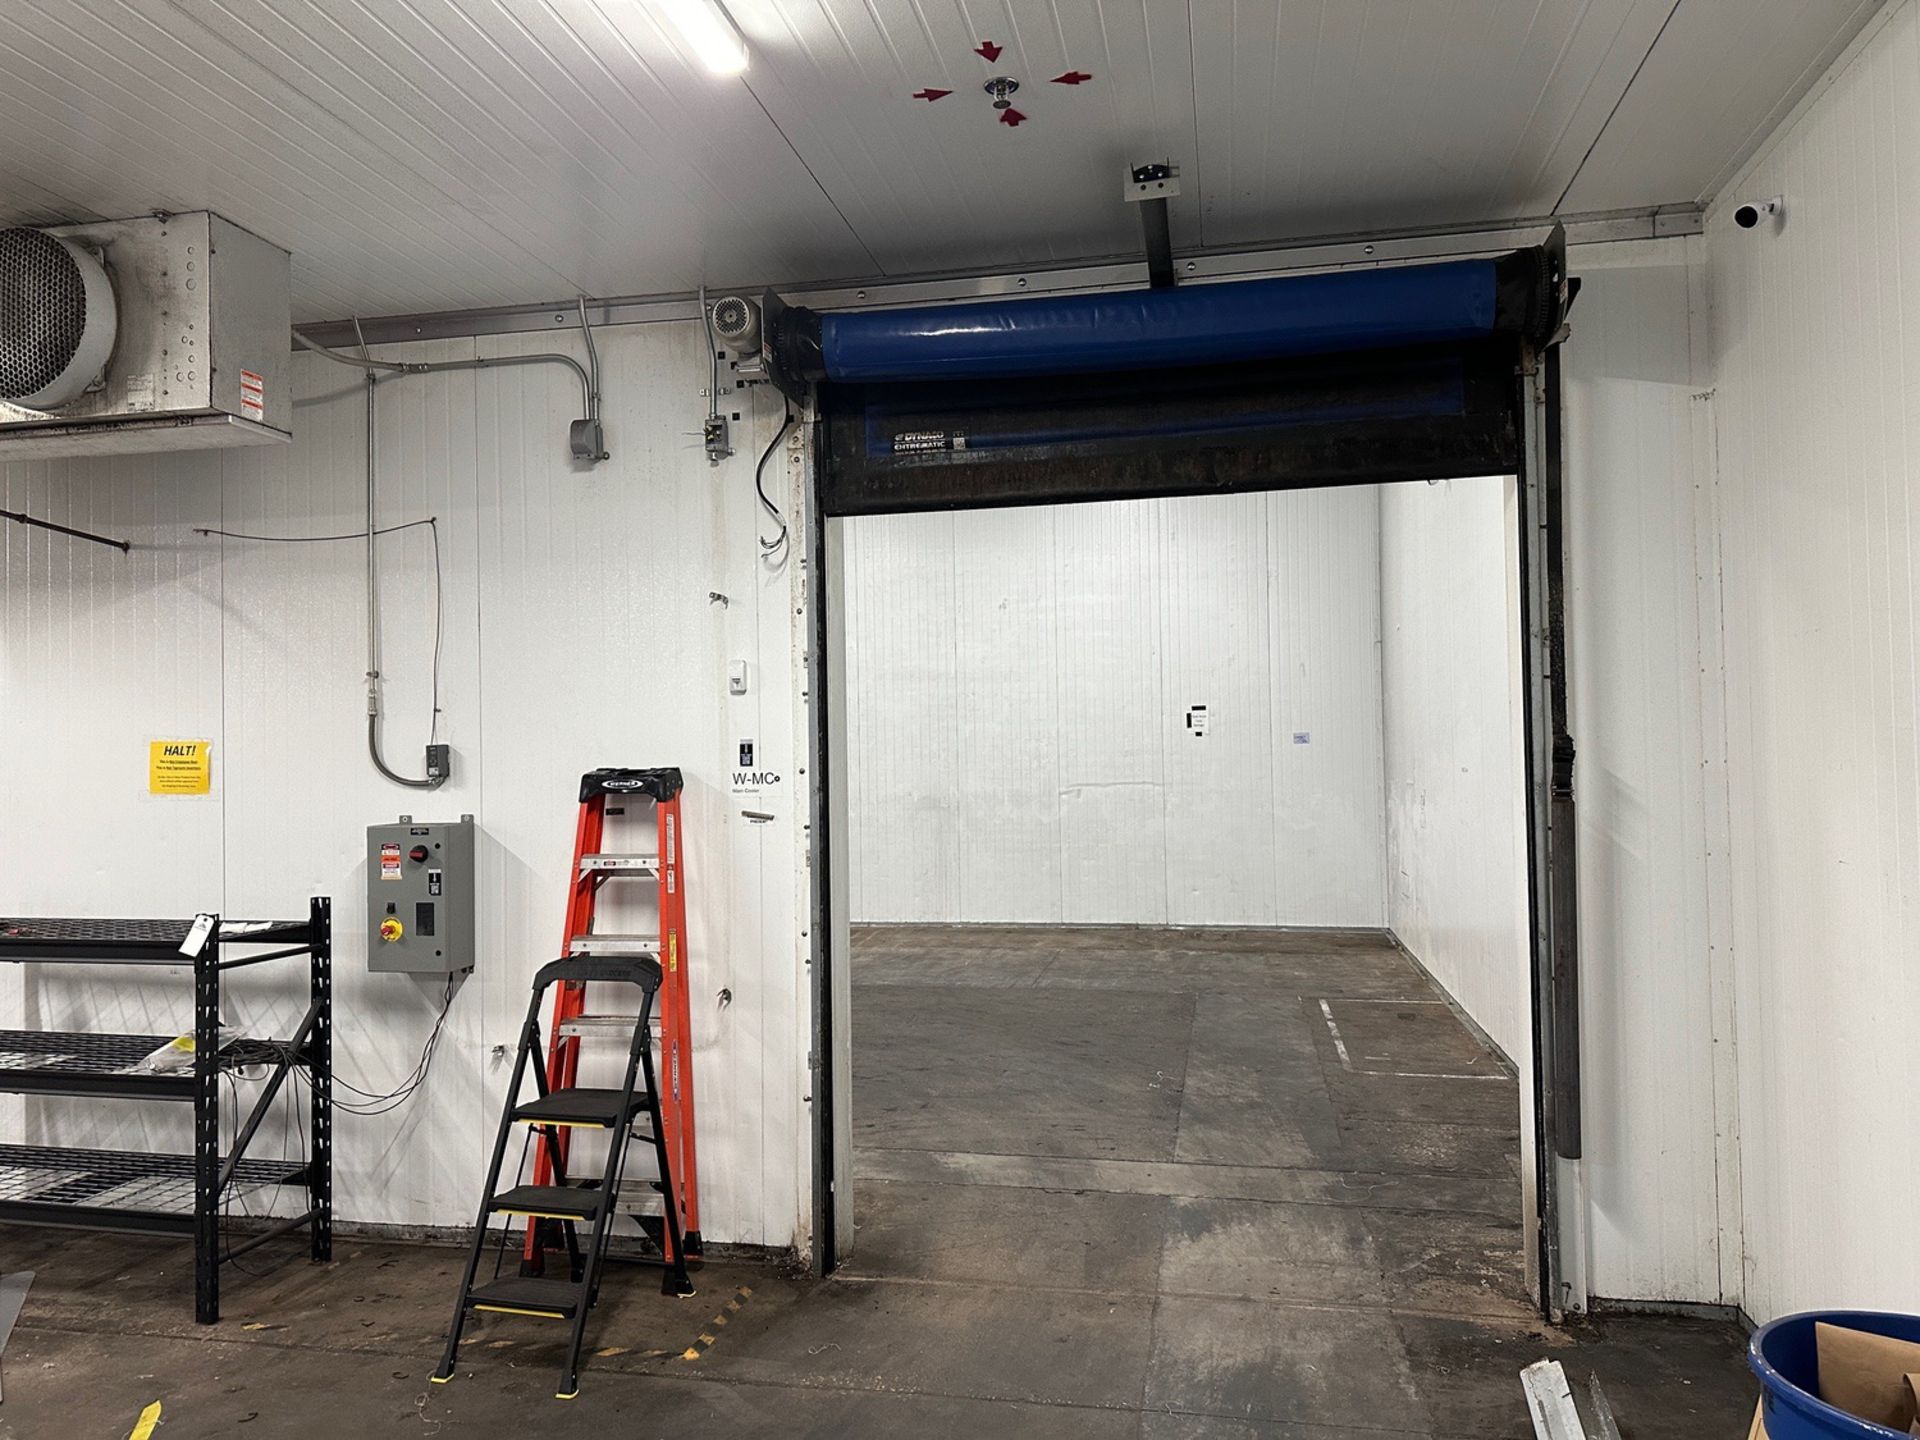 Cold Box - (3) Cooling Units - Shared Wall - (Approx. 32' x 77' x 18' - 8' x 10' Drive In Door - Man - Image 10 of 14